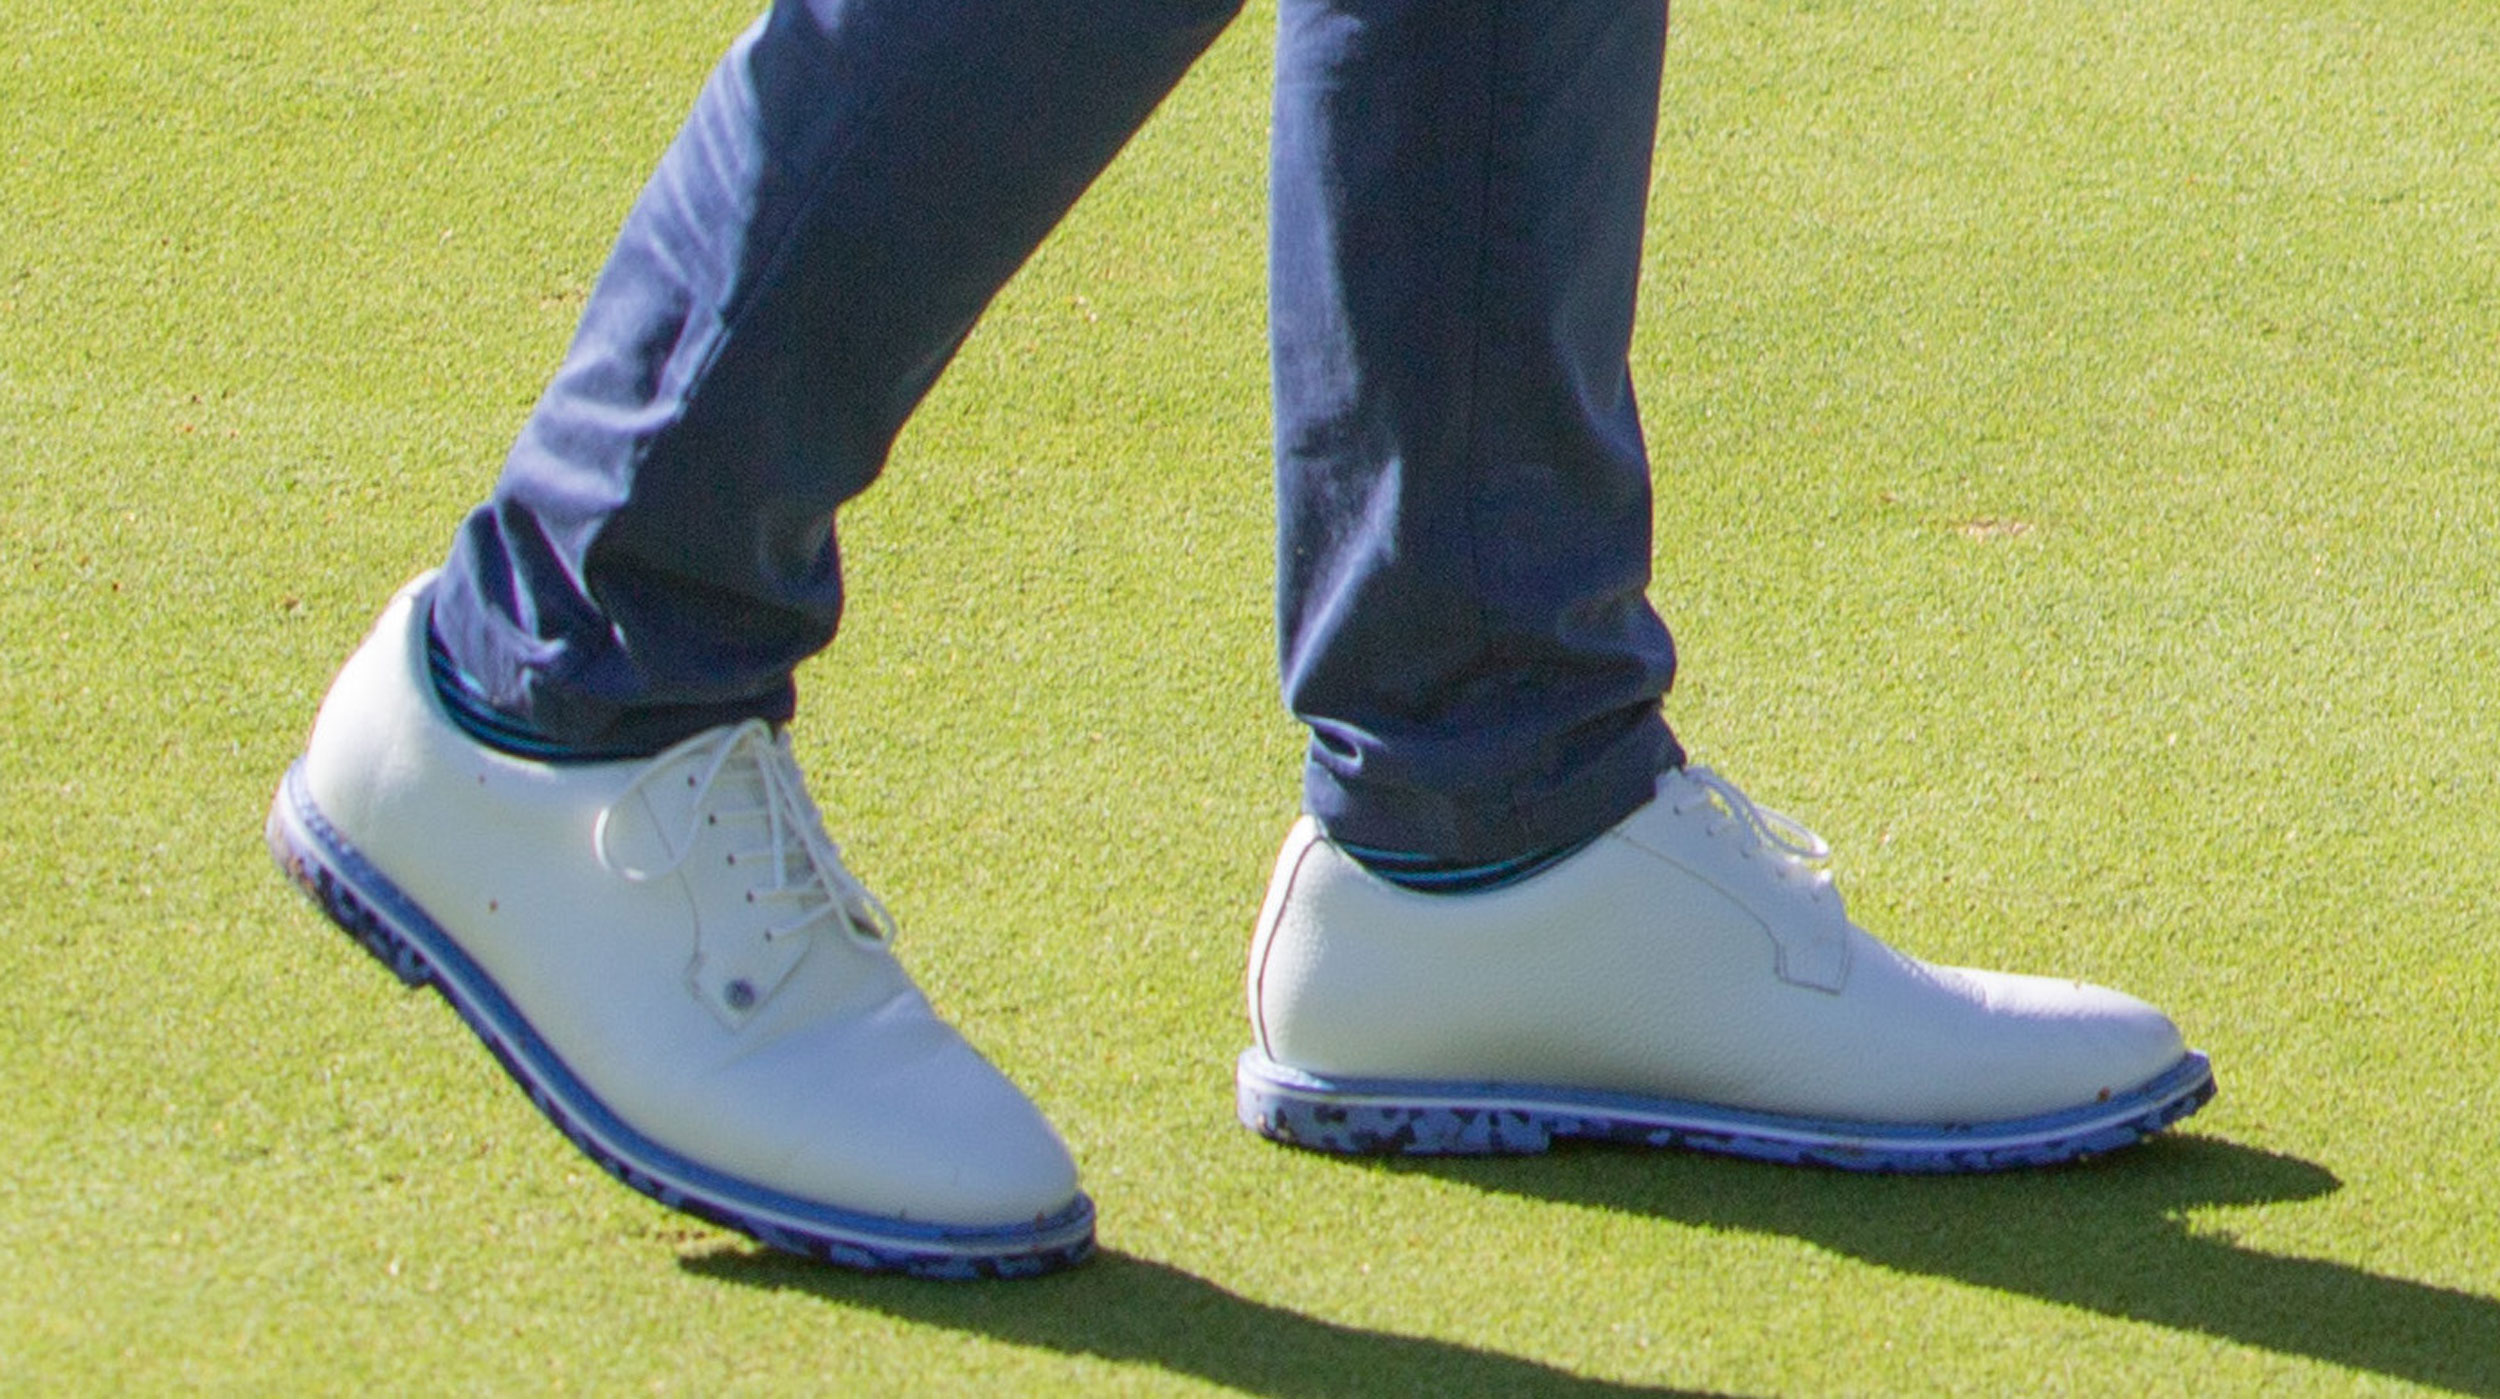 G/FORE Gallivanter Golf Shoes Review | Golf Monthly